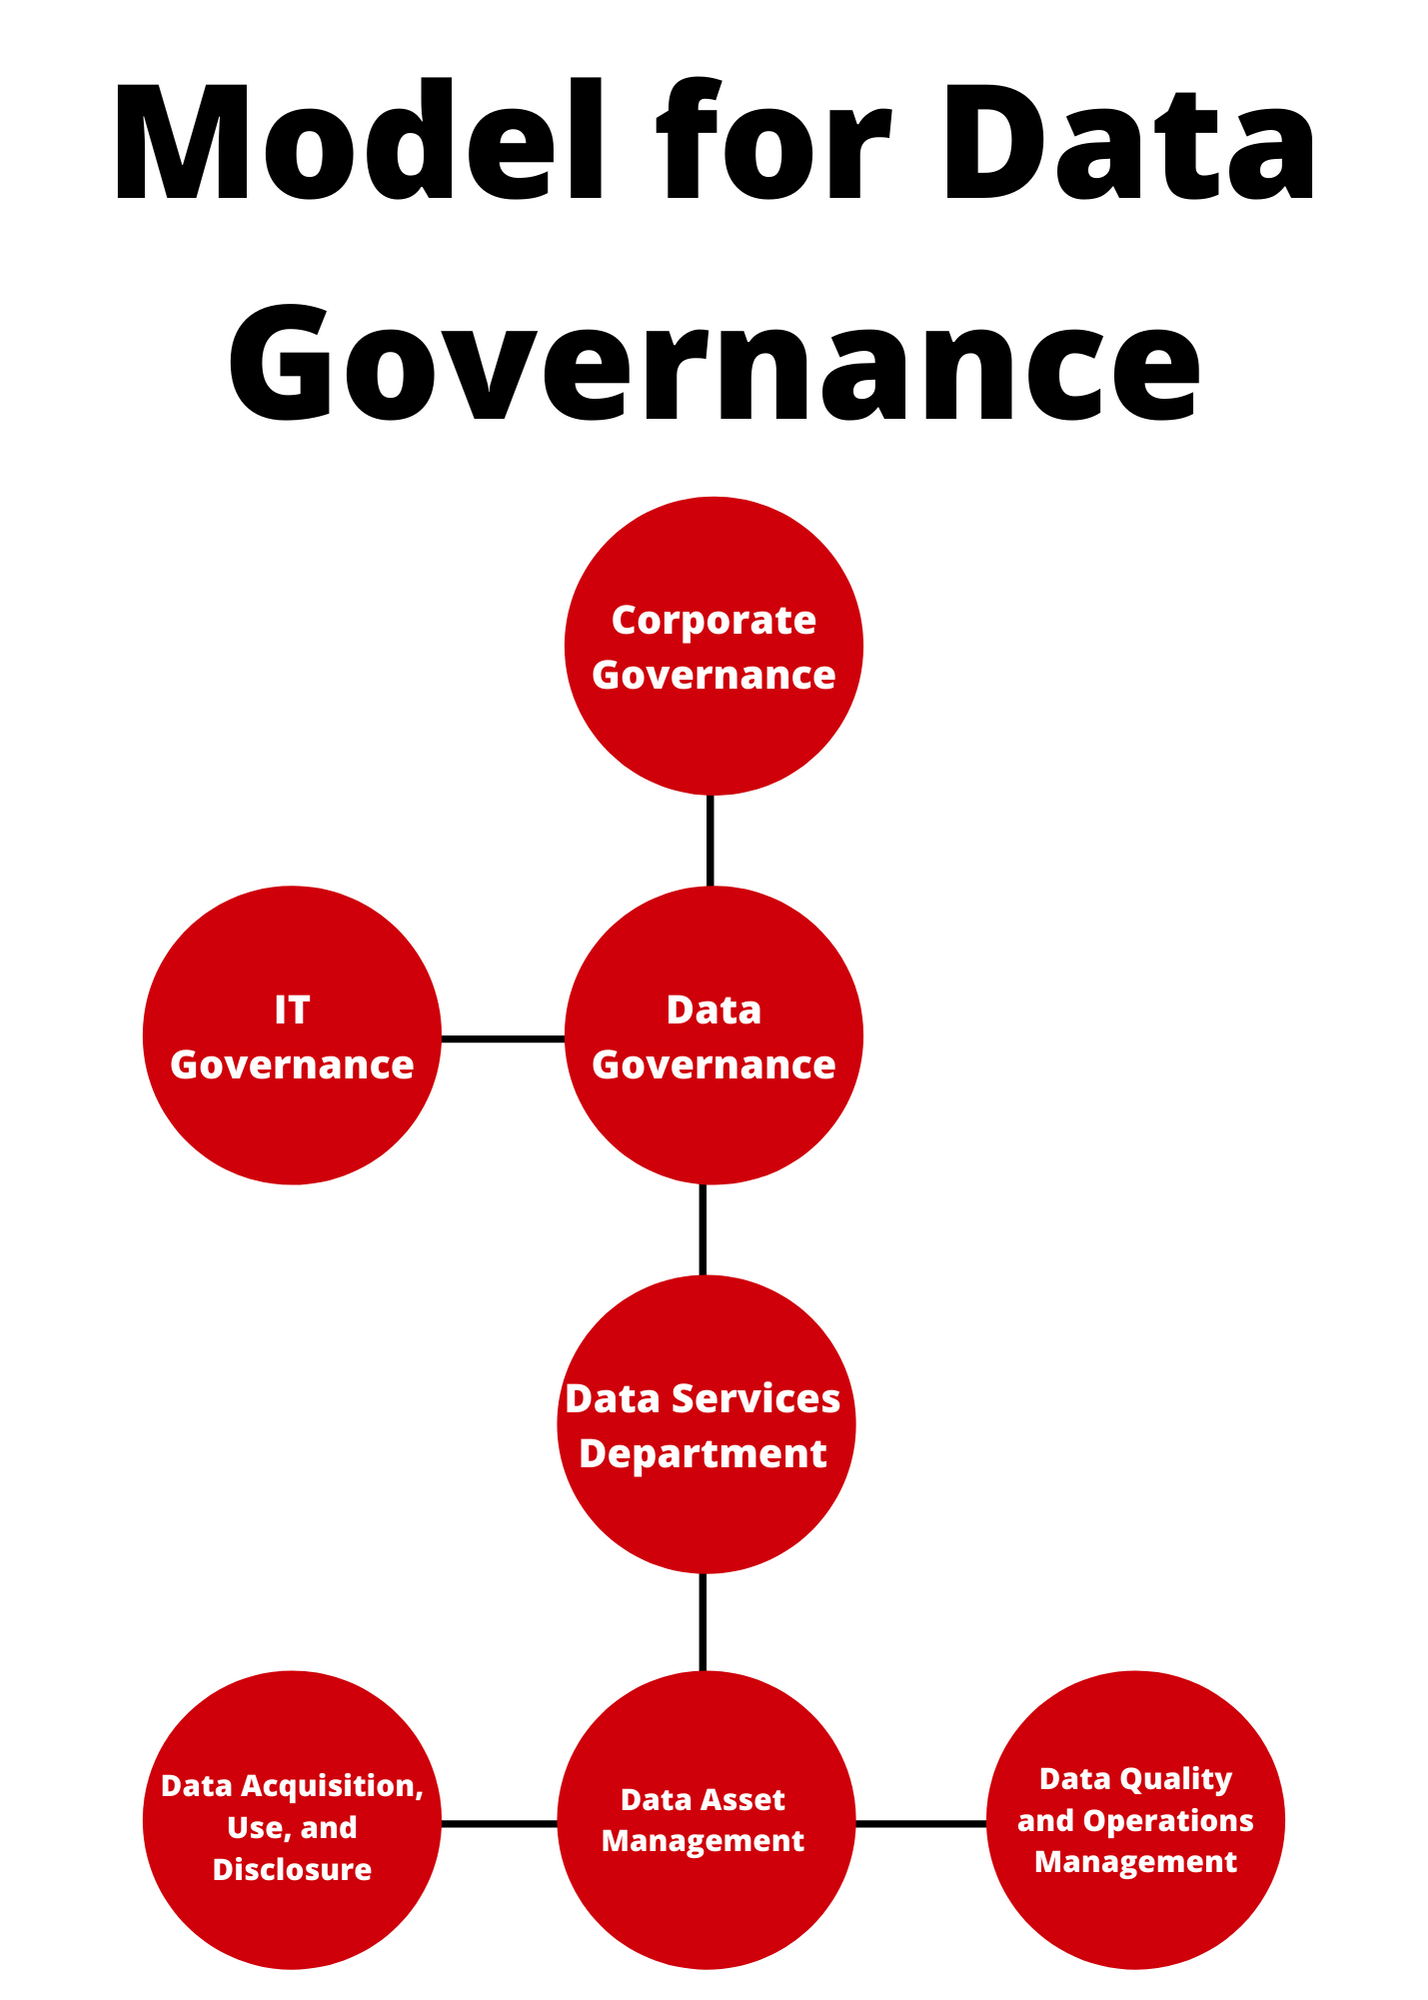 Illustration of an example of a model for data governance, with corporate governance and IT governance at the top, which leads to data governance, which leads to data services department, which leads to three entities: (1) Data acquisition, use, and disclosure; (2) Data asset management; and (3) Data quality and operations management